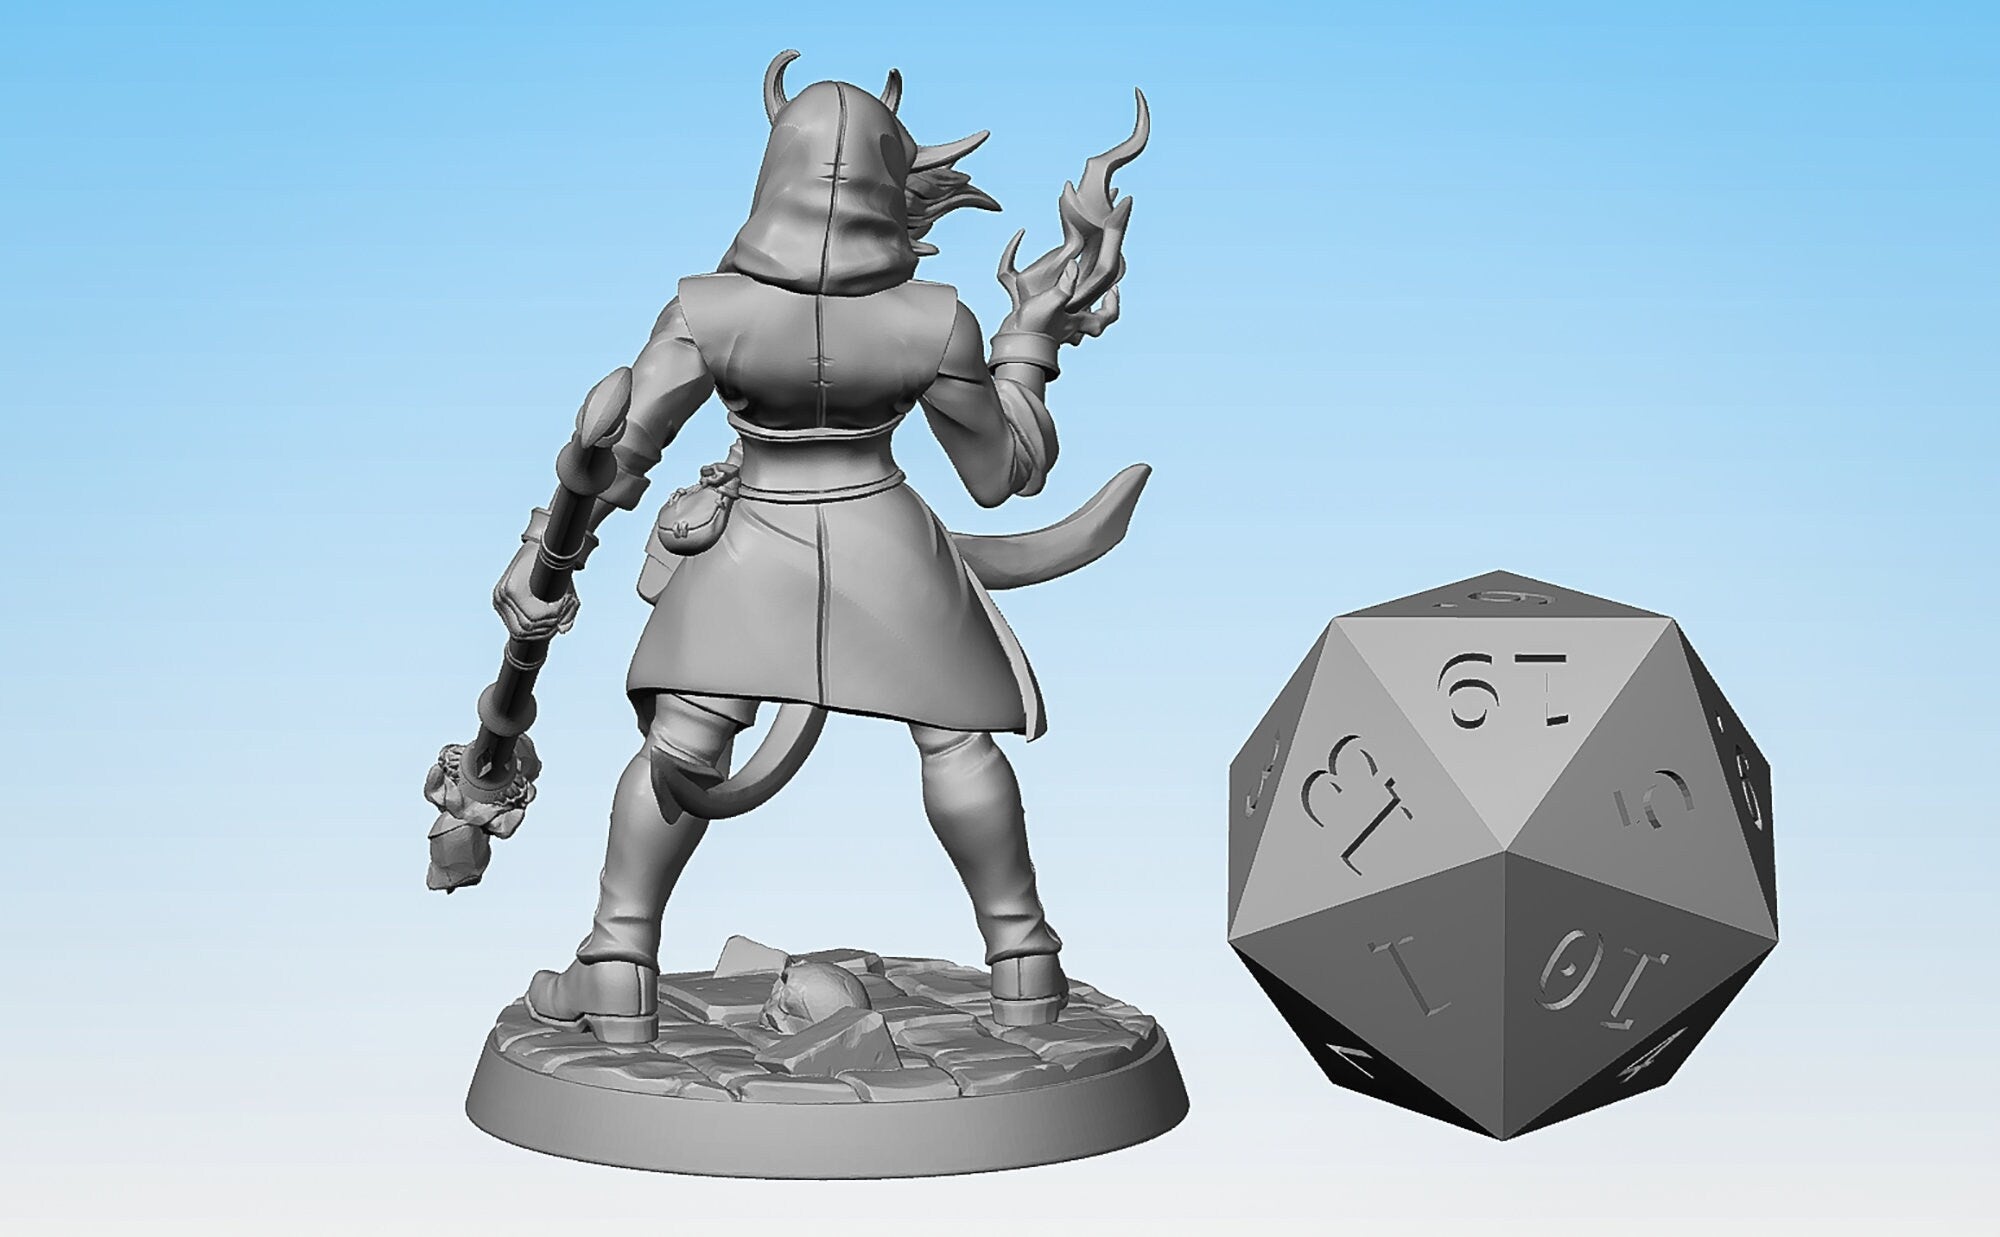 TIEFLING (f) Warlock "Mezzalfiend Trickster E" | Dungeons and Dragons | DnD | Pathfinder | Tabletop | RPG | Hero Size | 28 mm-Role Playing Miniatures